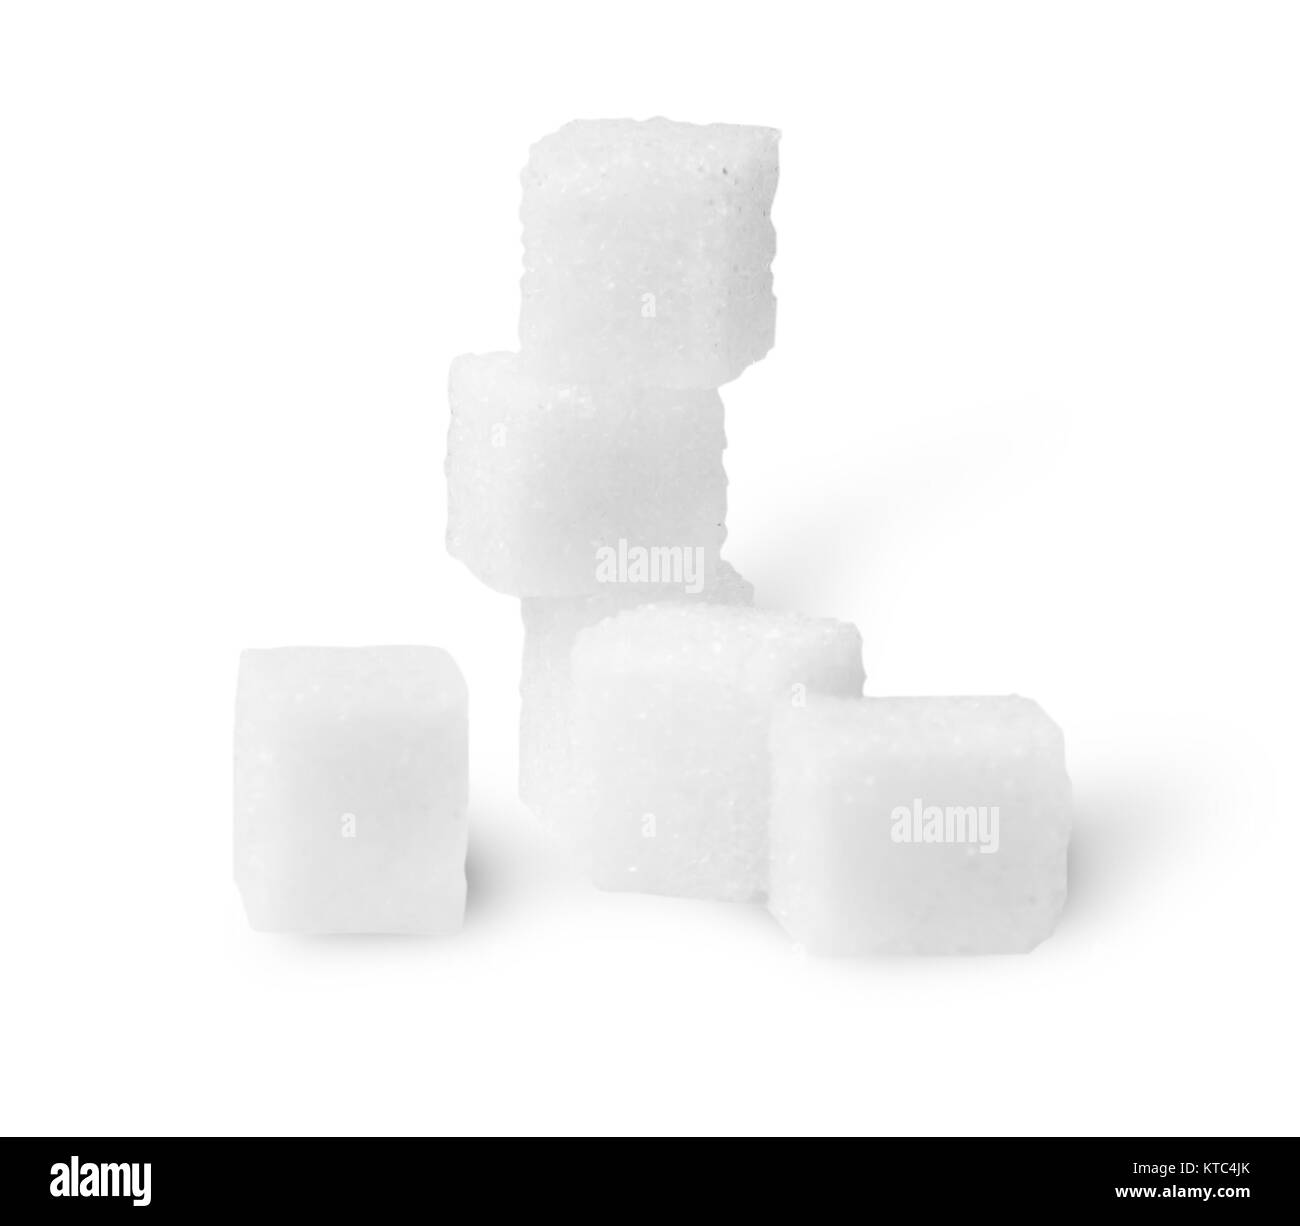 Some Sugar Cubes Stock Photo